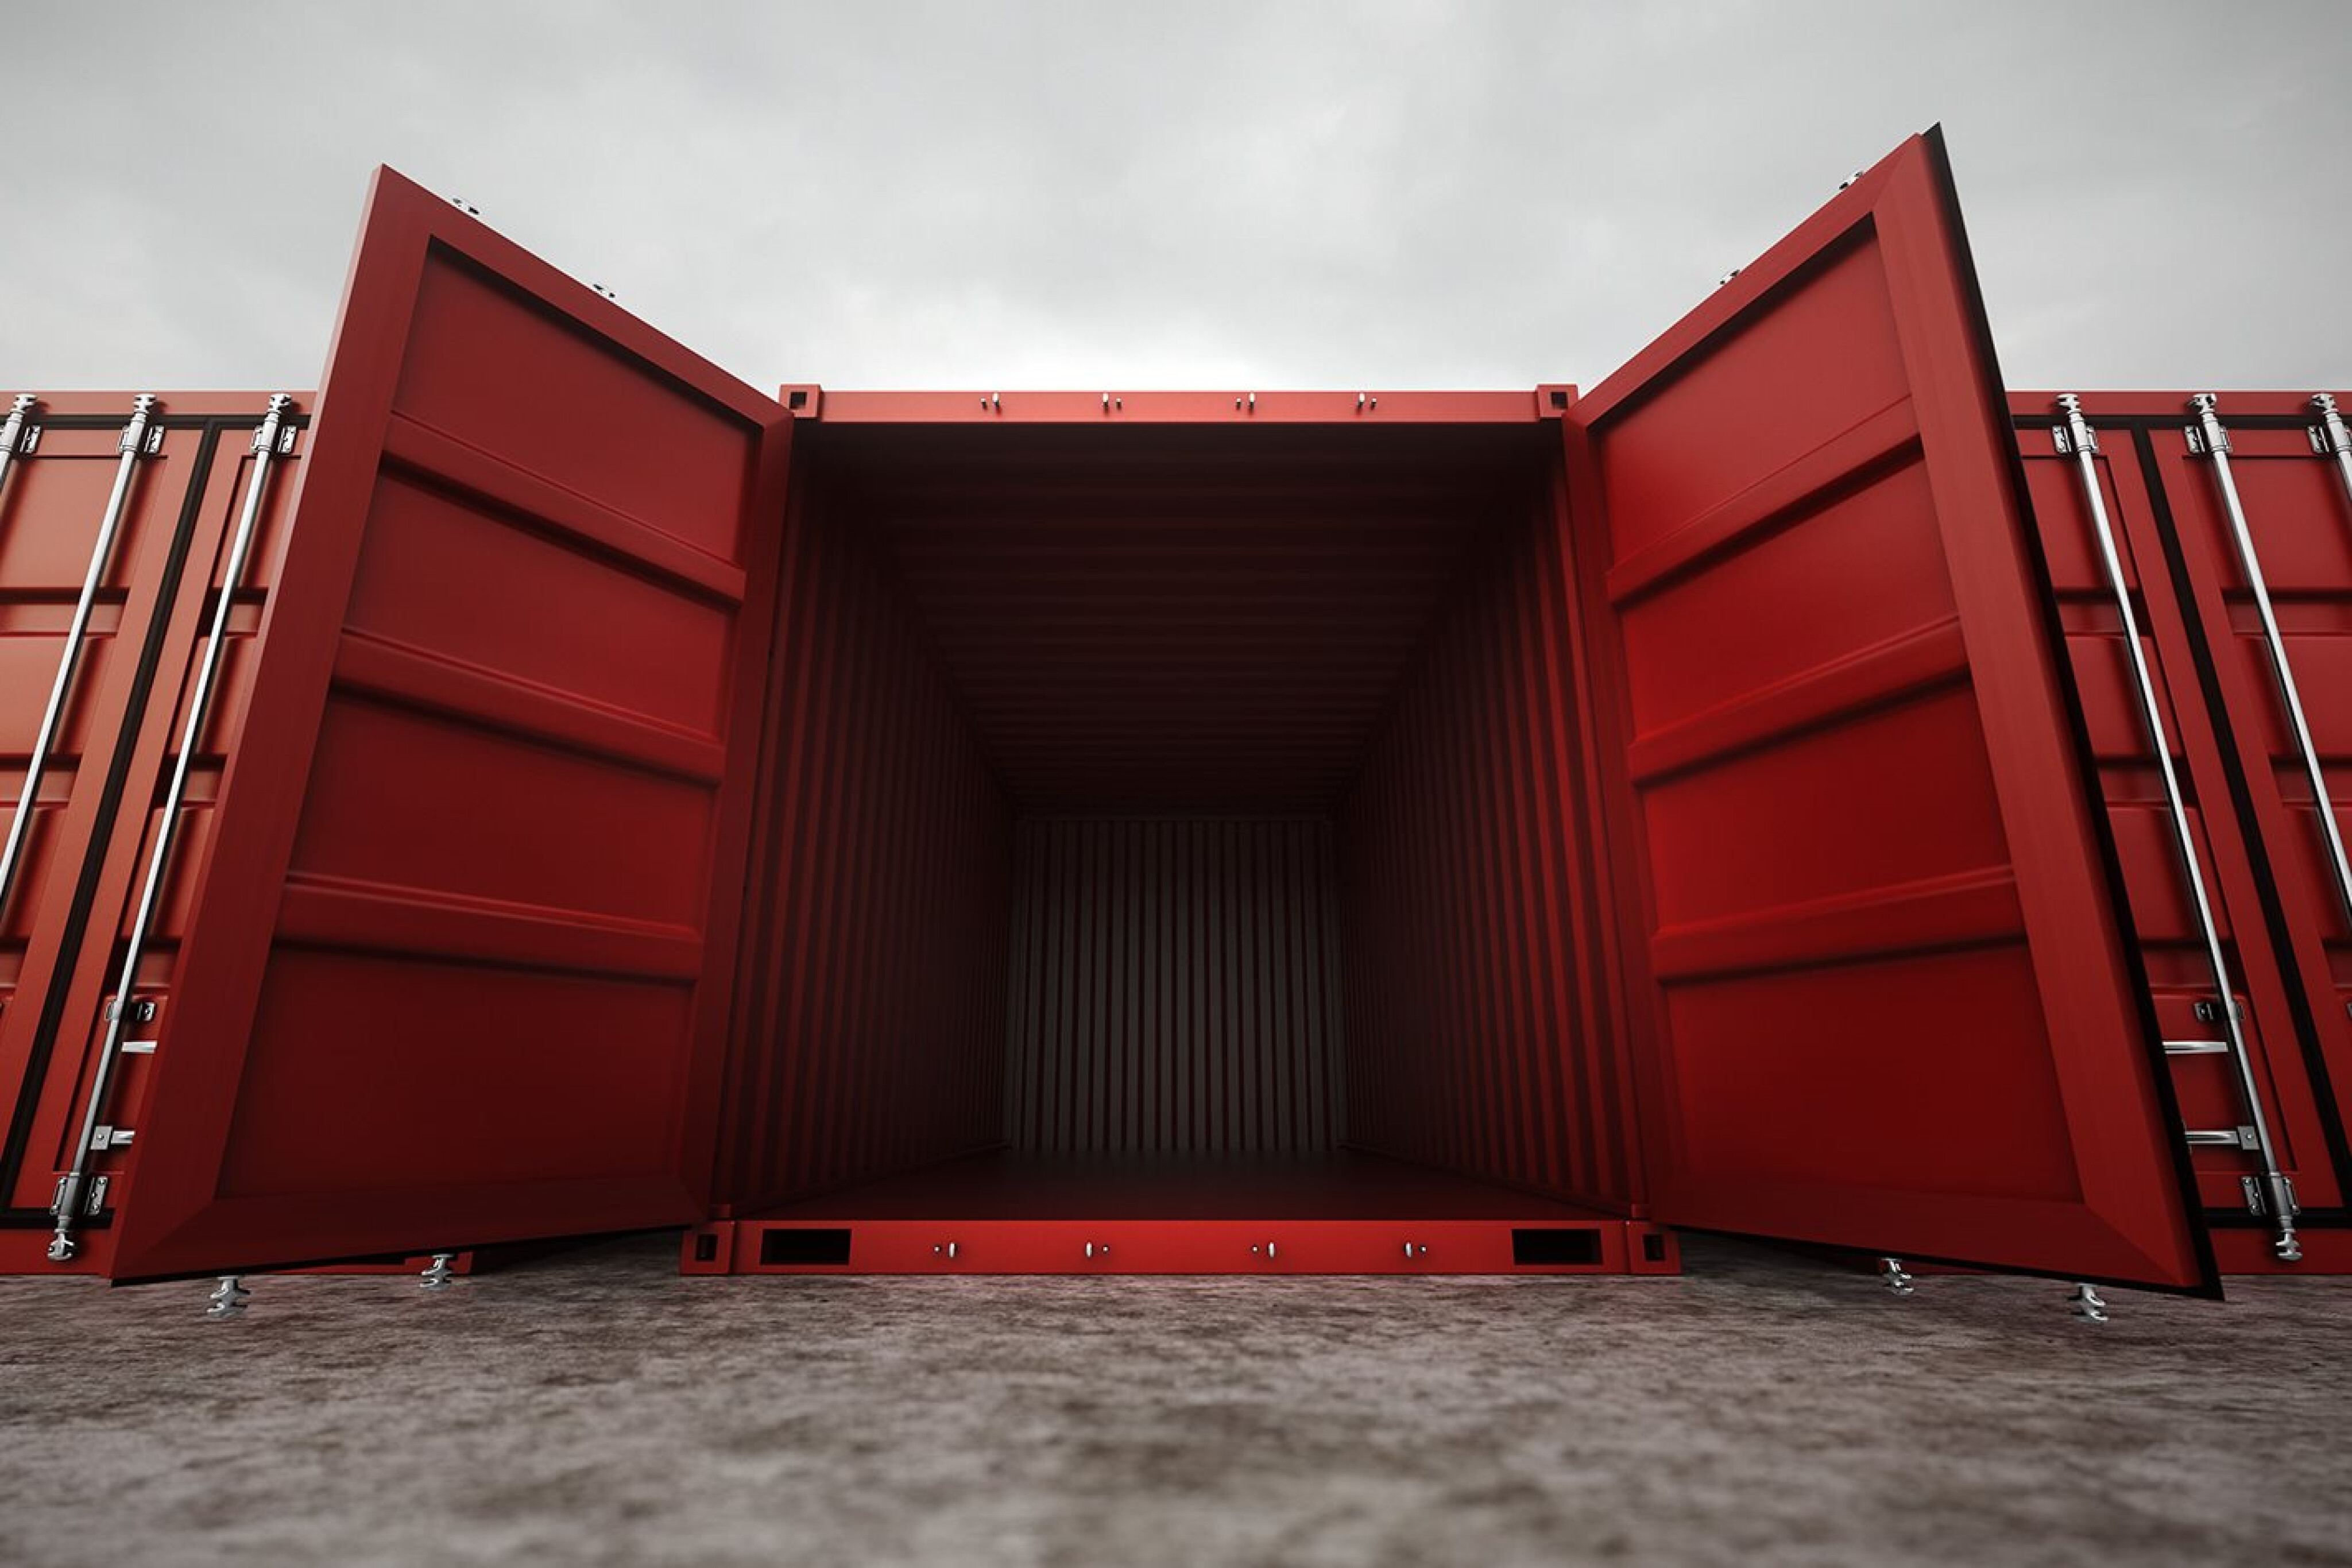 b99609be514/shipping container open jpg